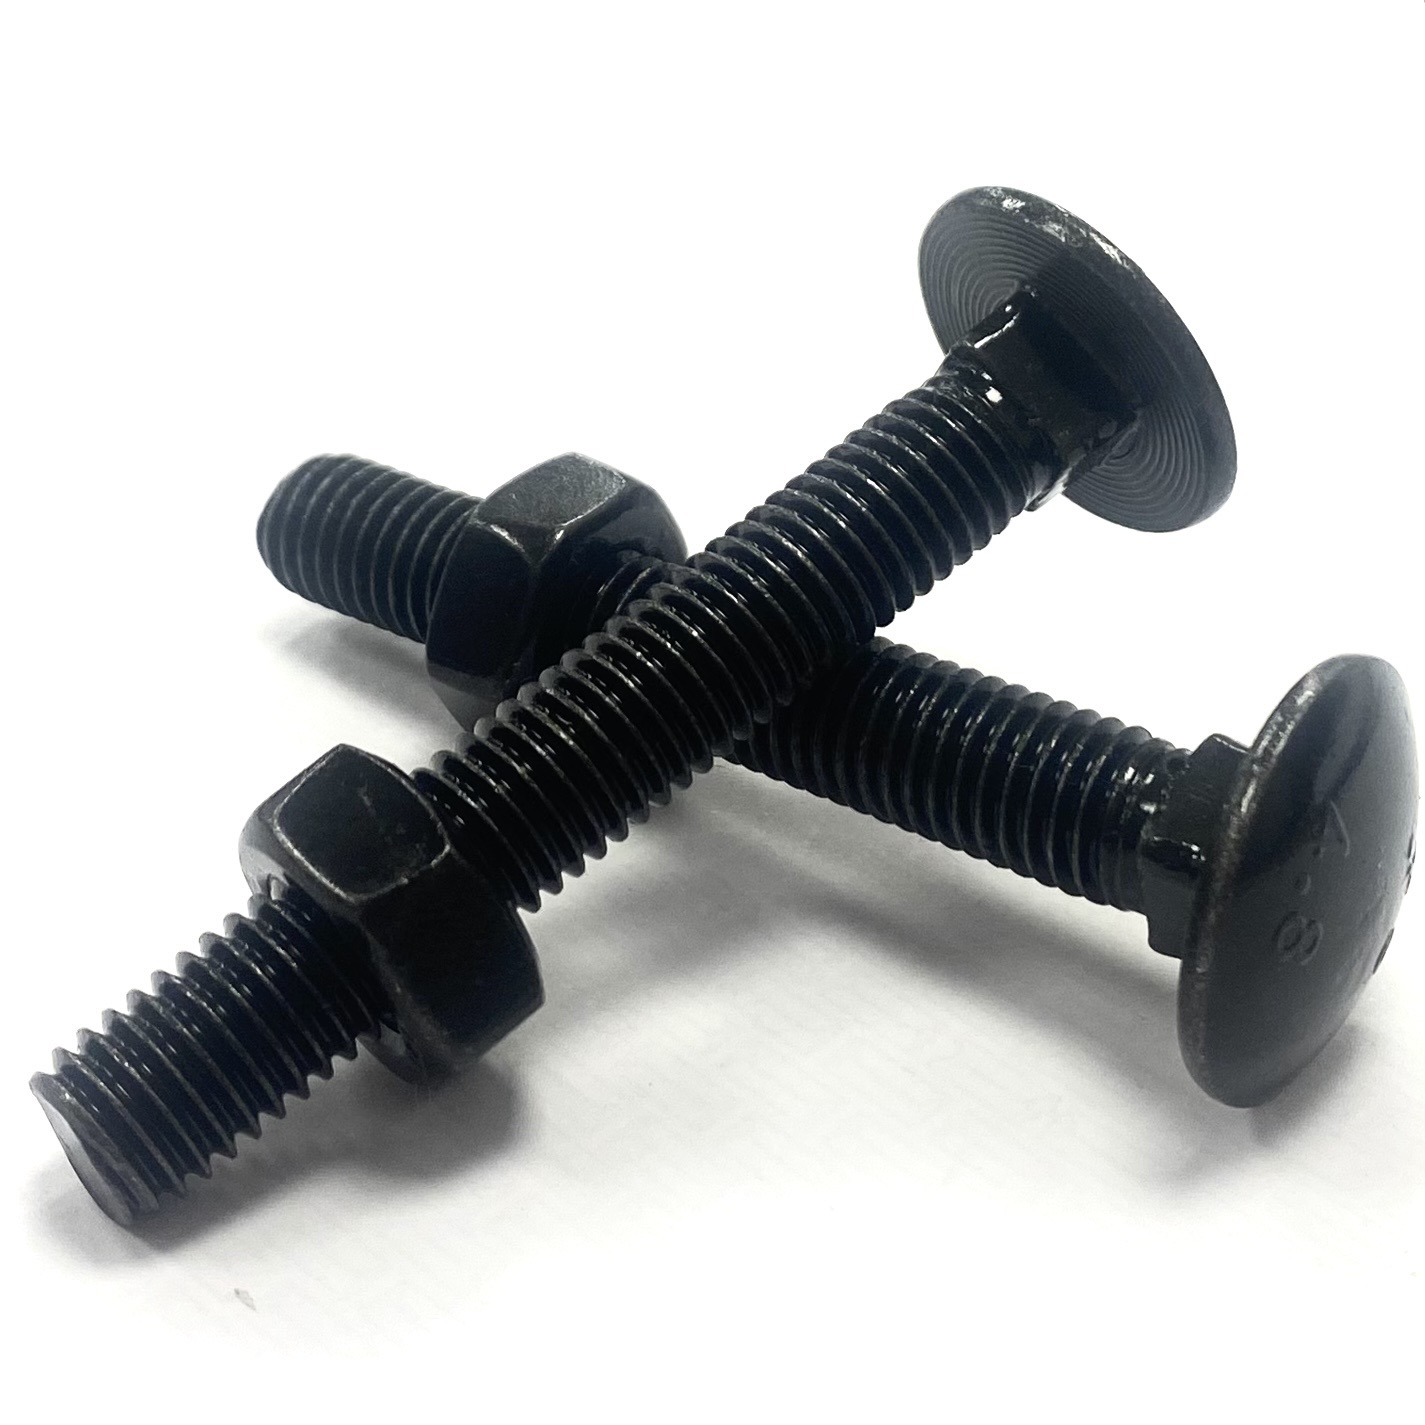 M8 x 50mm Mild Steel Carriage Coach Cup Square Bolts, with Hexagon Nut  Black Passivated Zinc Plated, DIN 603/934 Bolt WorldBolt World